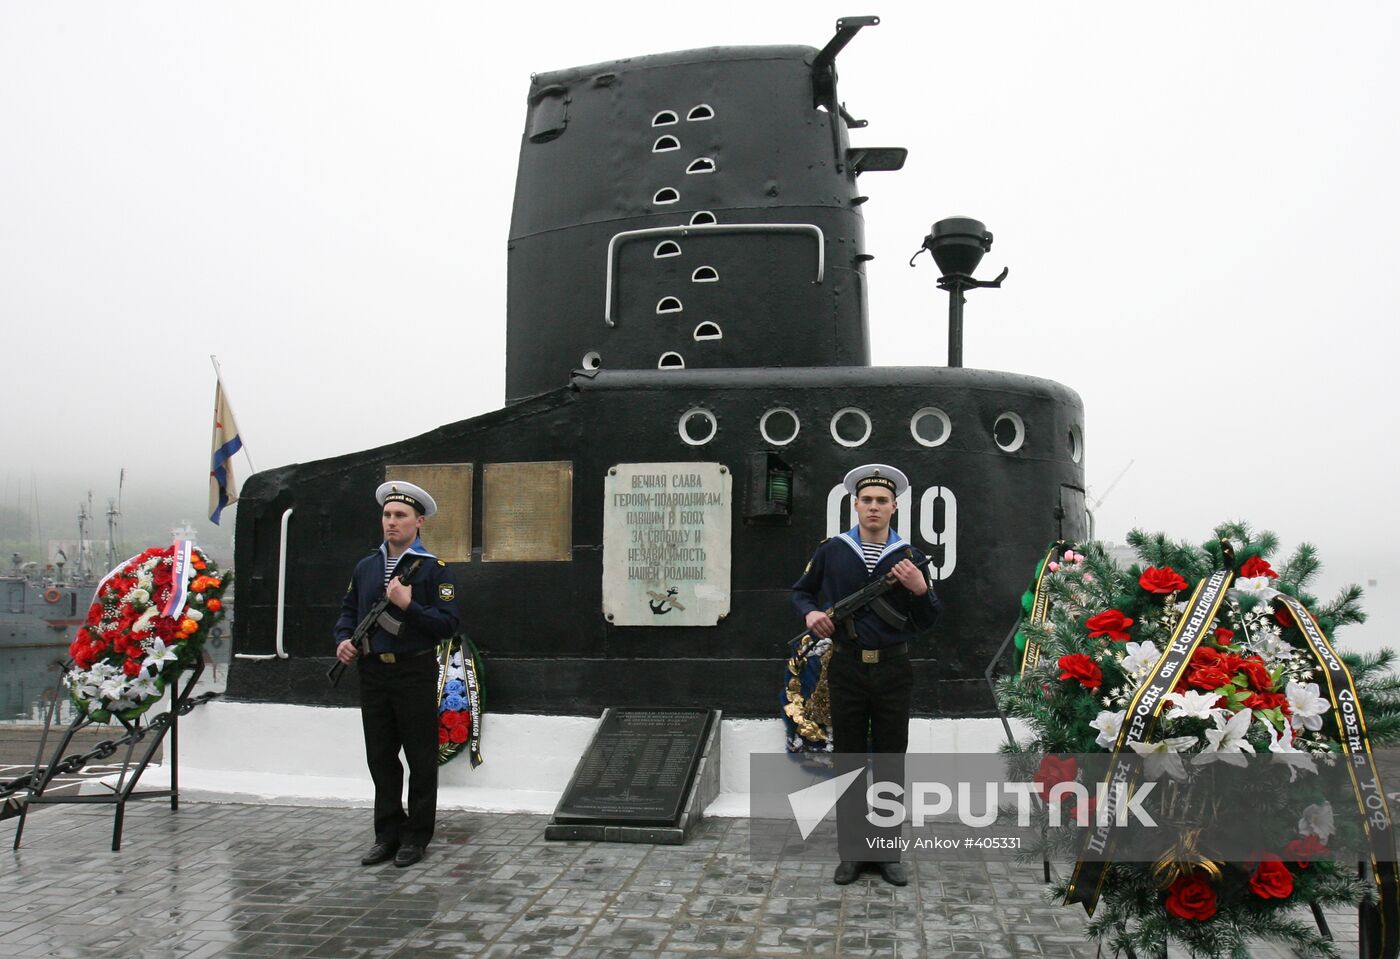 Memorial plaque in memory of submariners perished in WWII